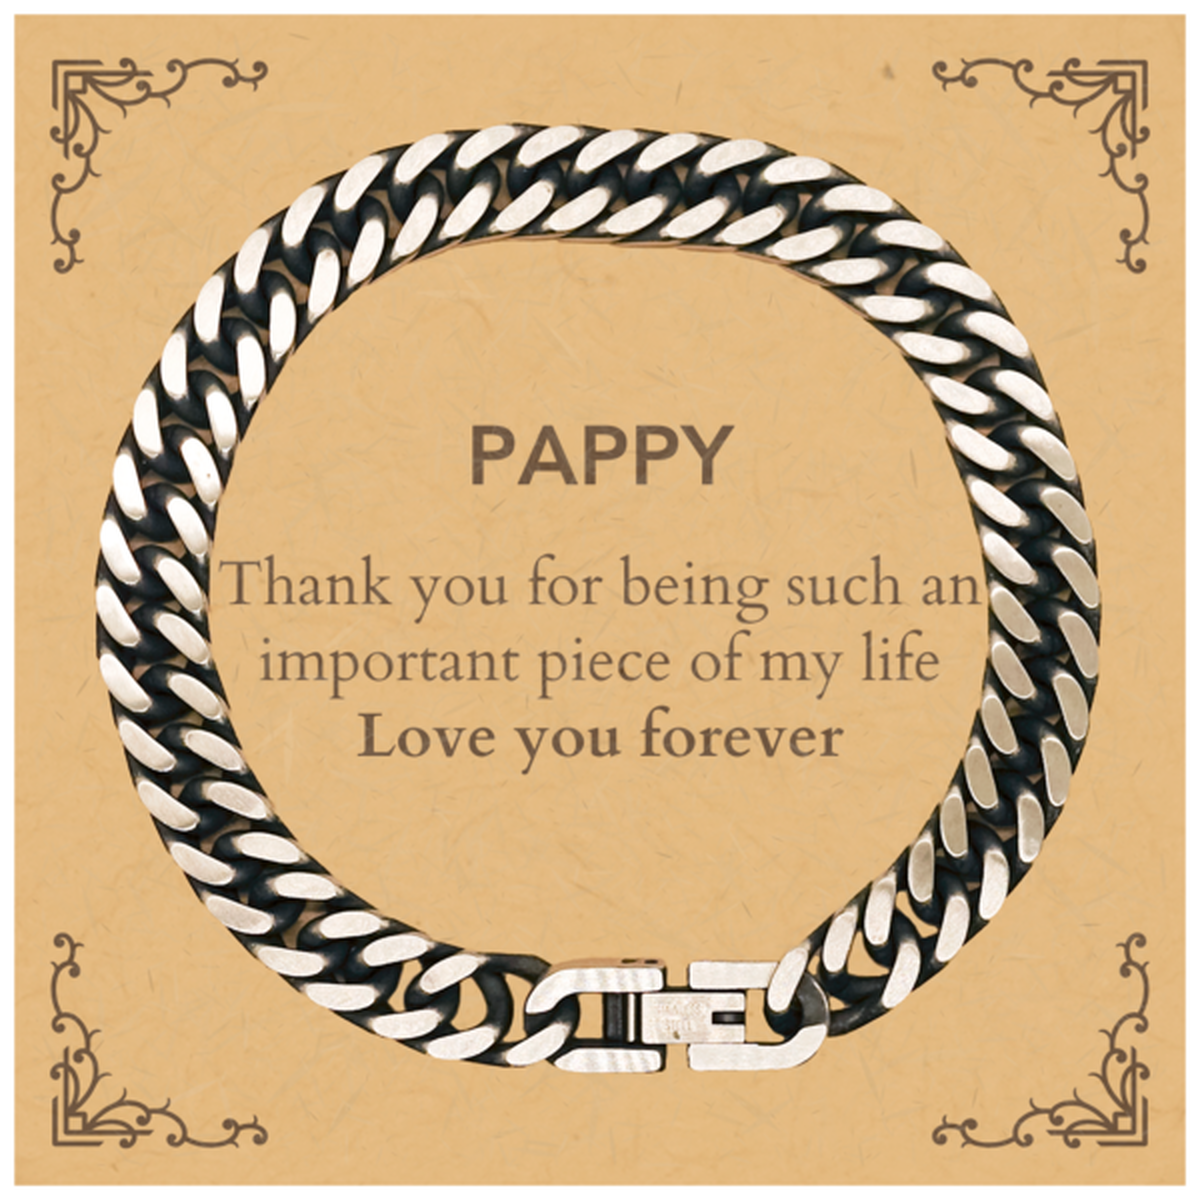 Appropriate Pappy Cuban Link Chain Bracelet Epic Birthday Gifts for Pappy Thank you for being such an important piece of my life Pappy Christmas Mothers Fathers Day